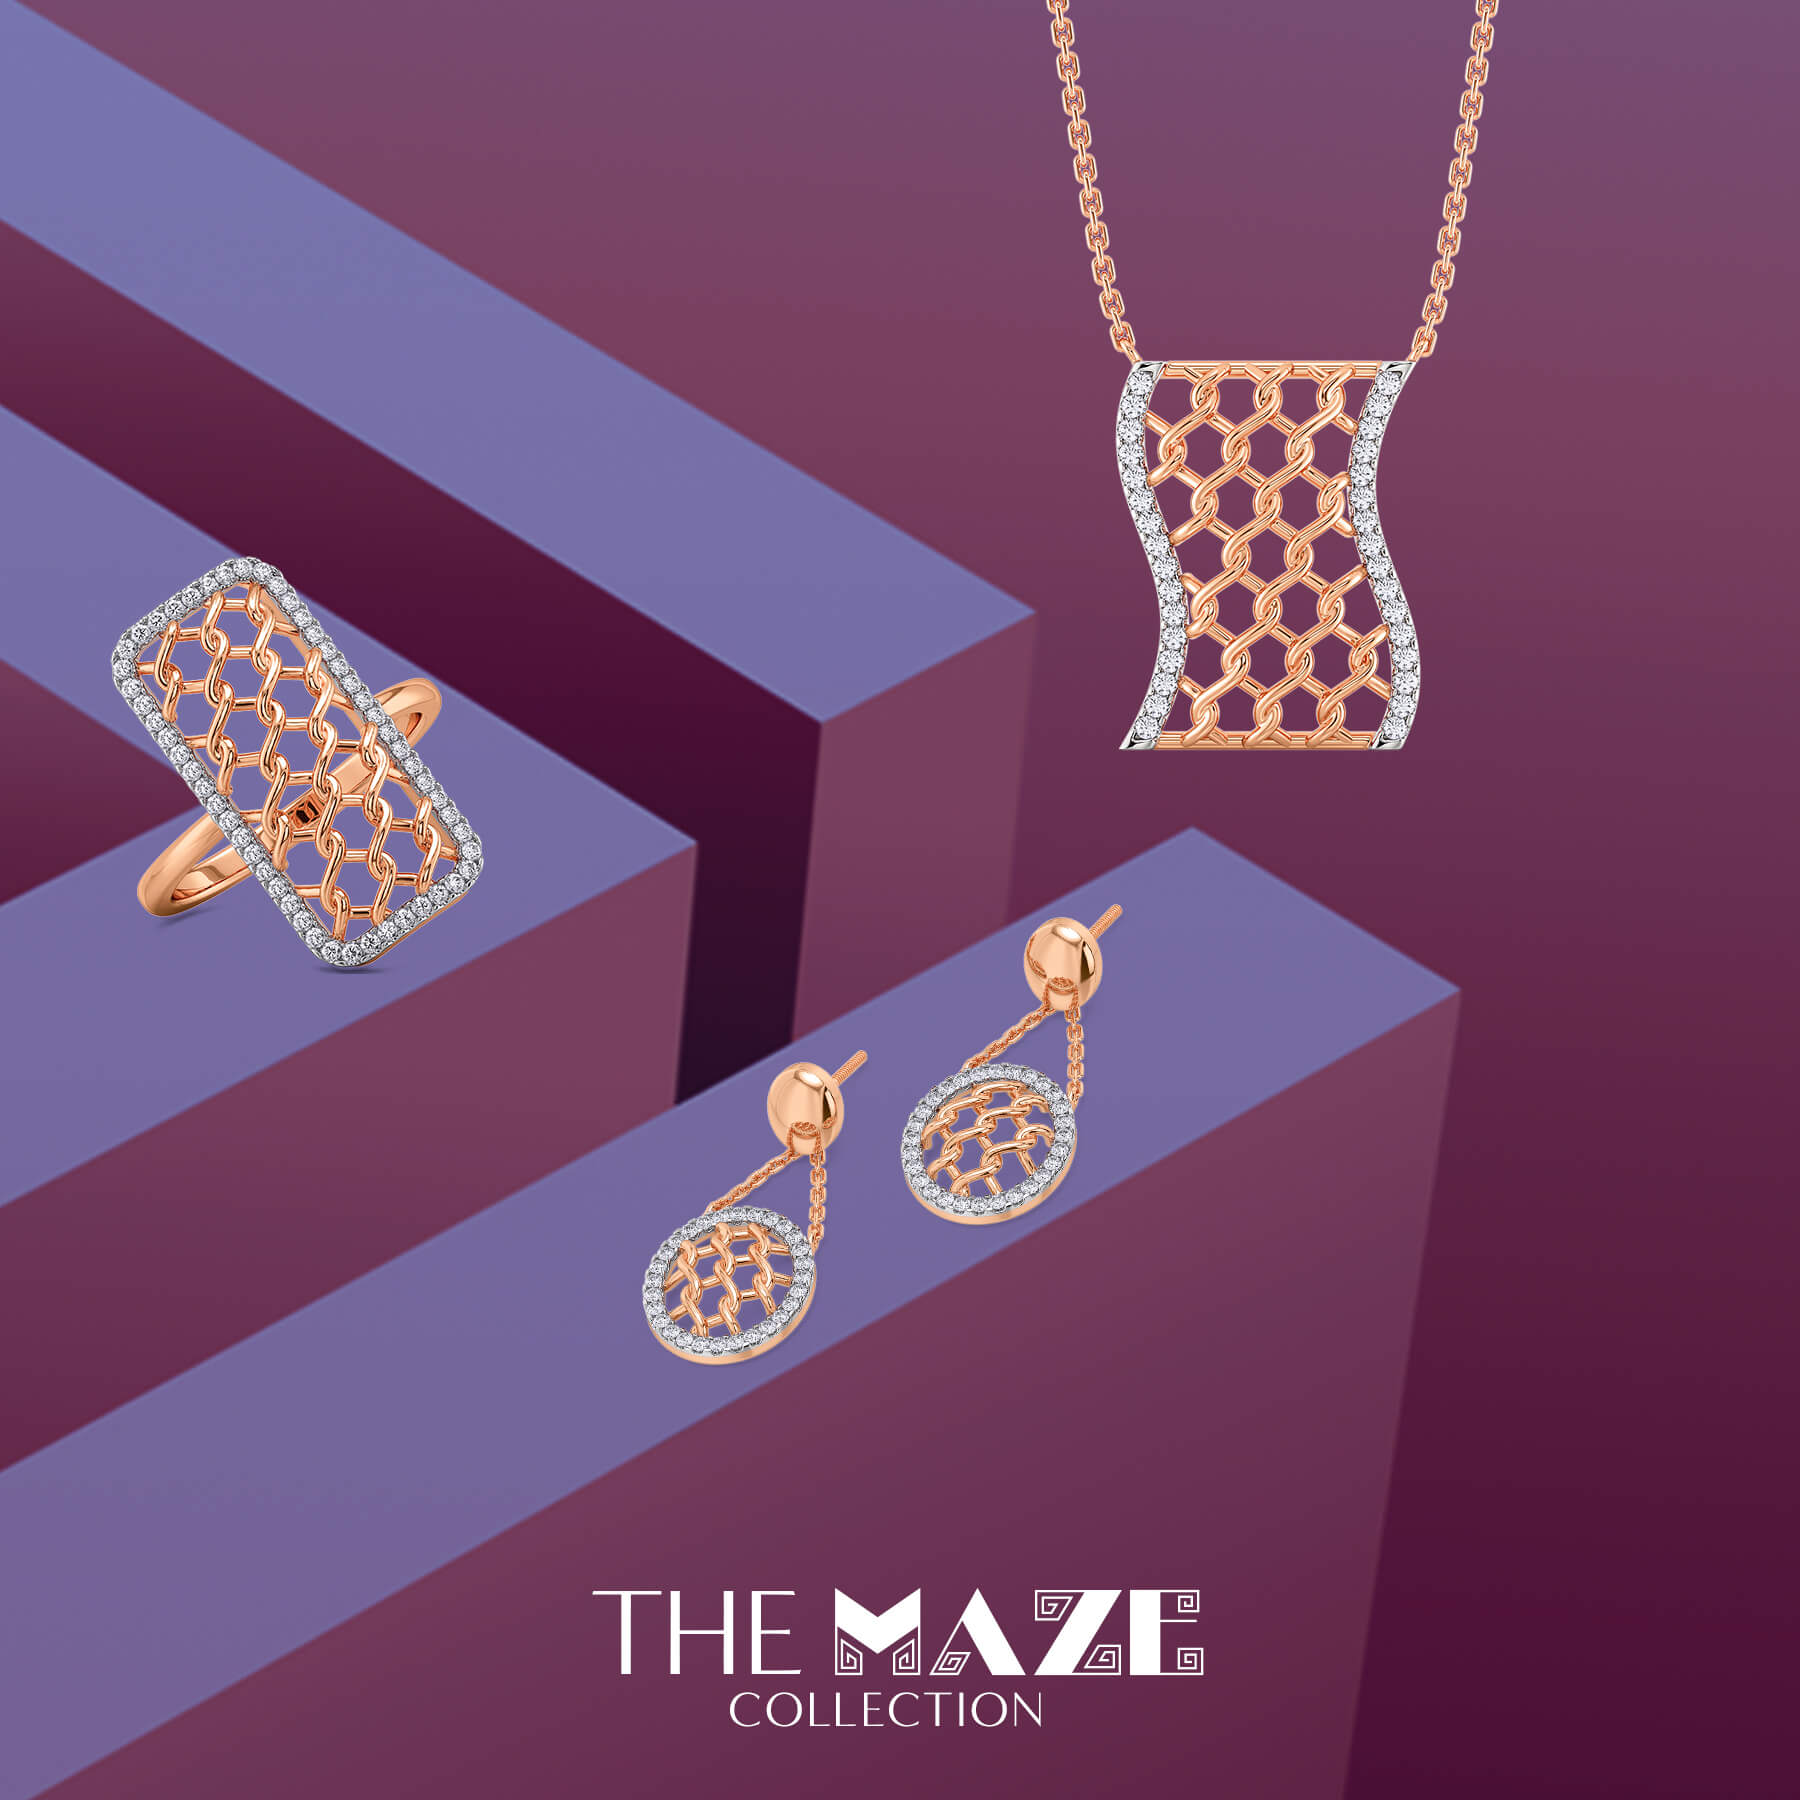 The Maze Collection